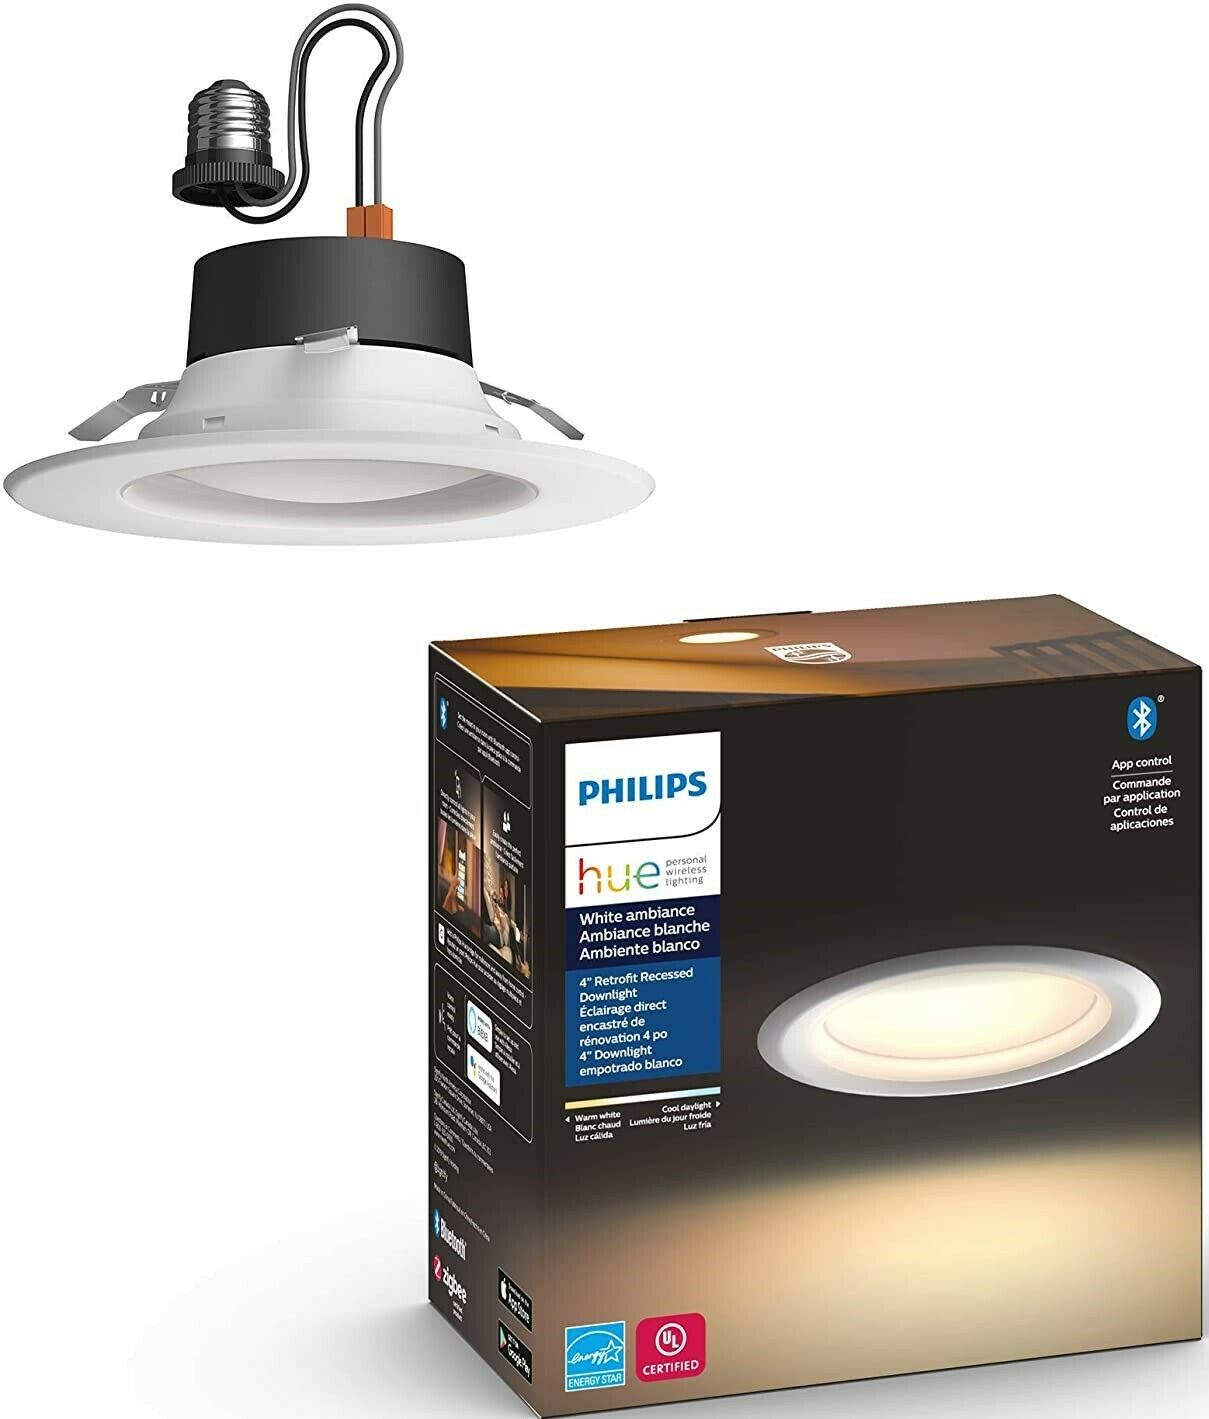 Philips Hue White Ambiance Led Smart Retrofit 4" Recessed Downlight